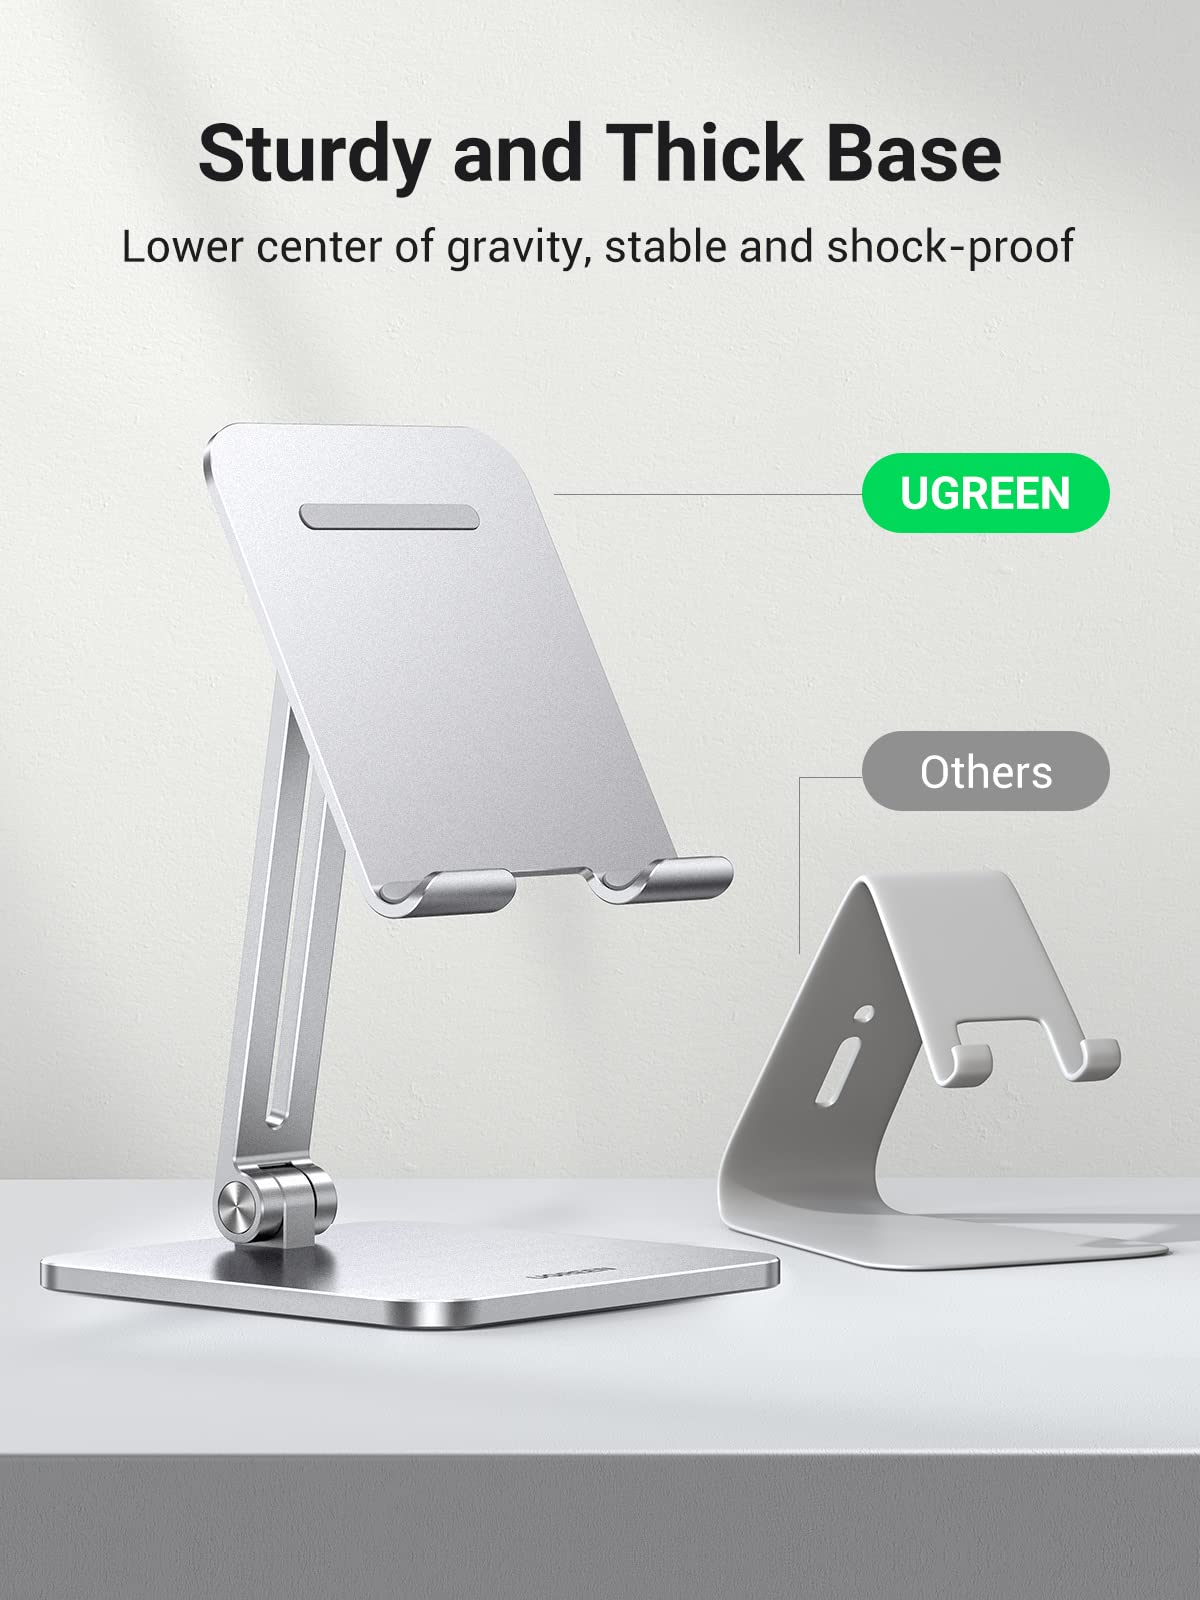 Ipad Air Pro 11 12 9 Tablet Stand Magnetic Aluminum Alloy Support